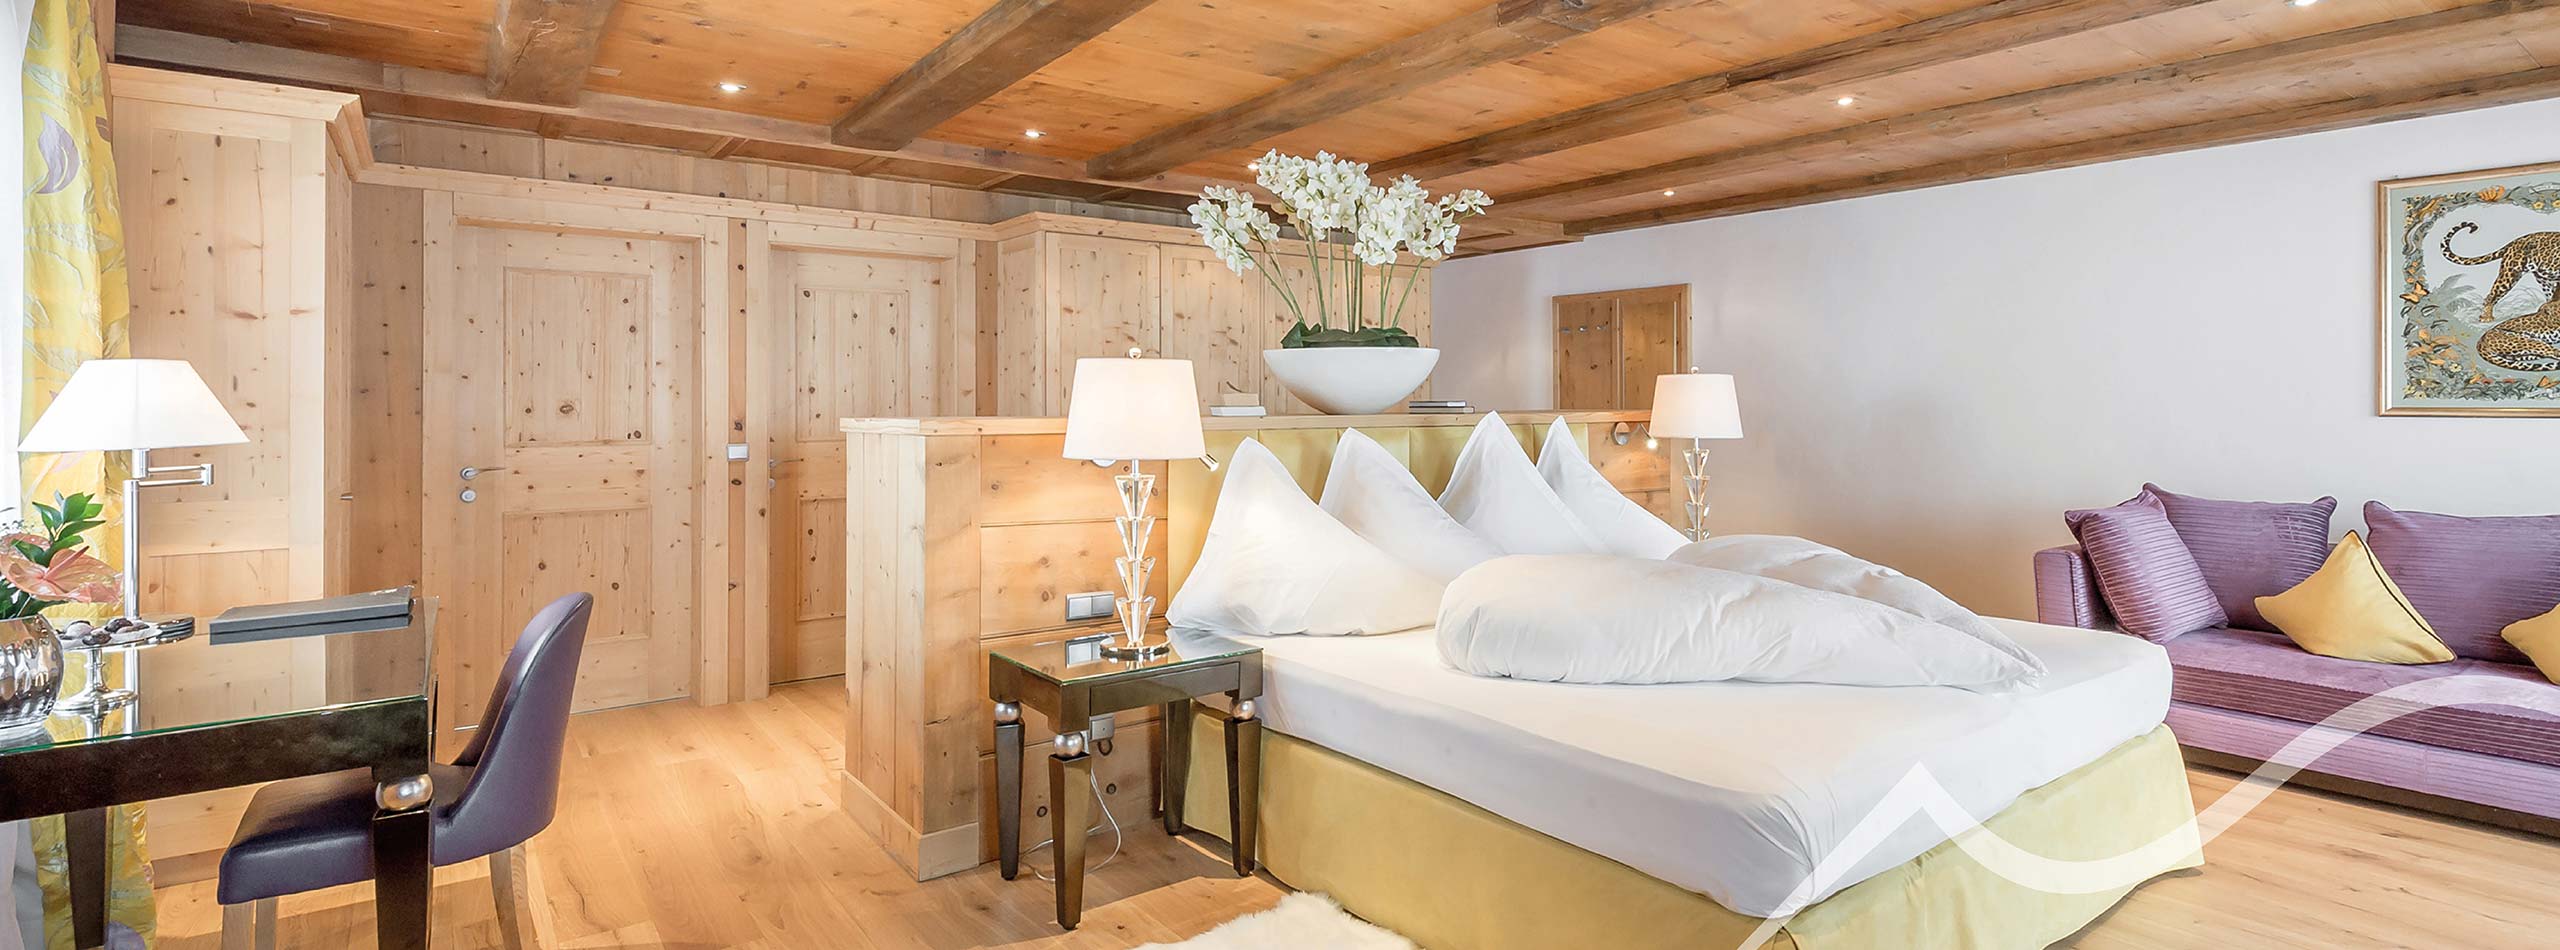 Last minute offers at our 5-star superior Tyrolean ski hotel Ötztal valley